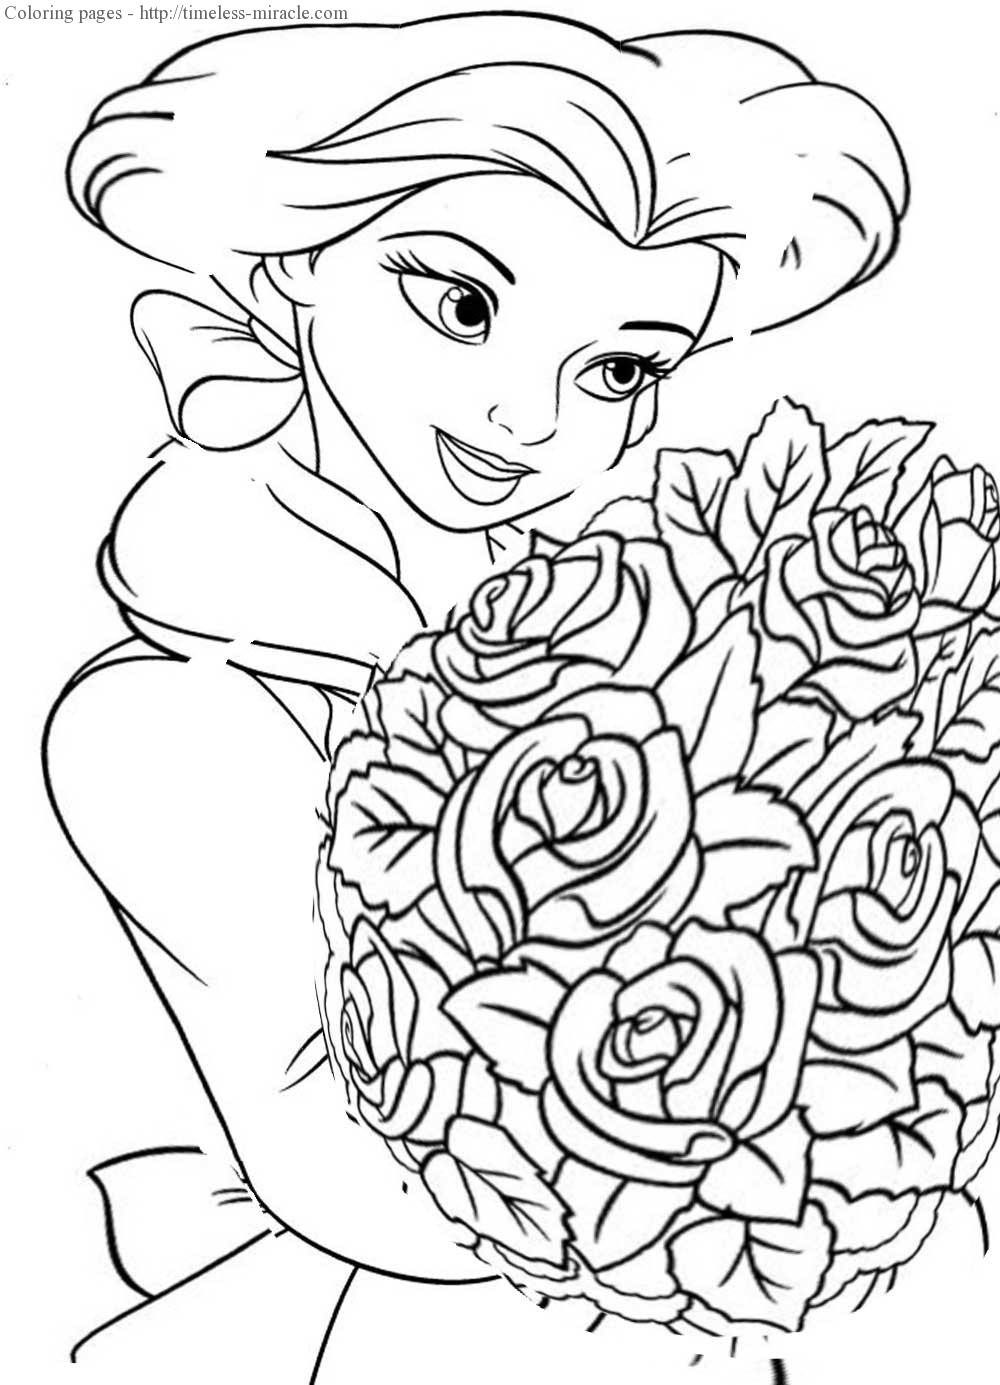 Disney Coloring Pages For Girls
 Disney coloring pages for girl timeless miracle